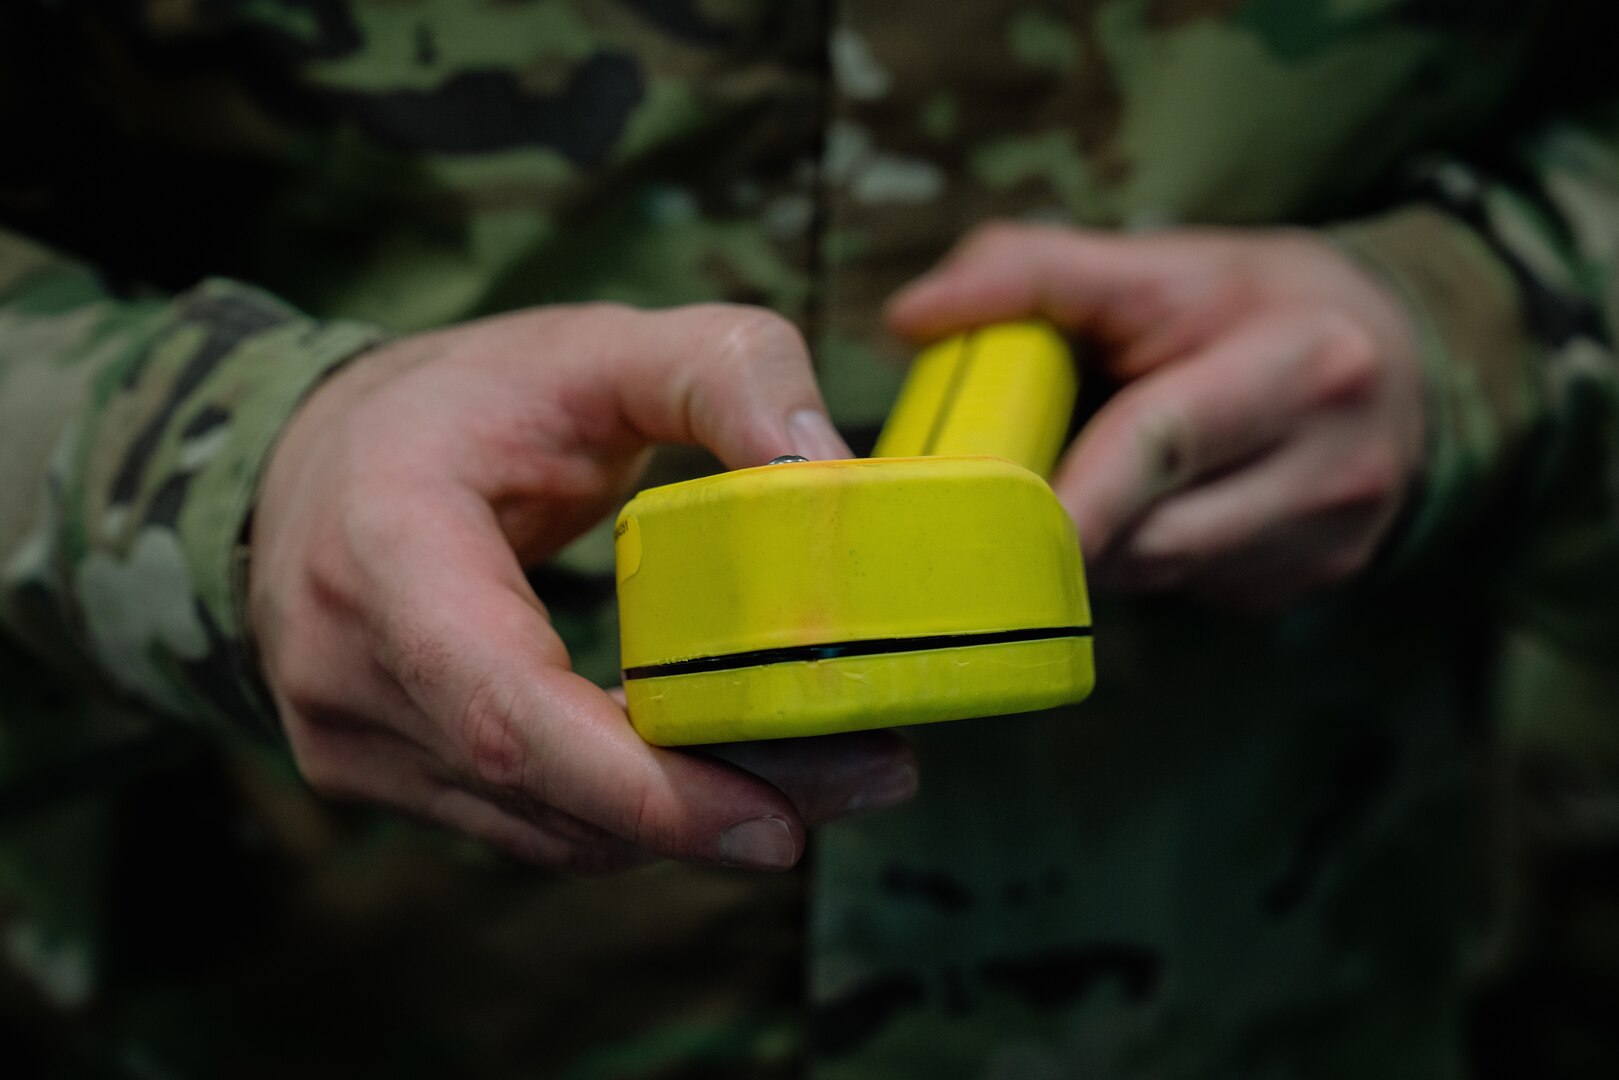 U.S. Air Force Staff Sgt. Andrew Lemay, 1st Special Operations Medical Readiness Squadron bioenvironmental engineering technician, Hurlburt Field, Florida, inspects a pancake probe used for radiation detection at MacDill Air Force Base, Florida, Dec. 7, 2022.